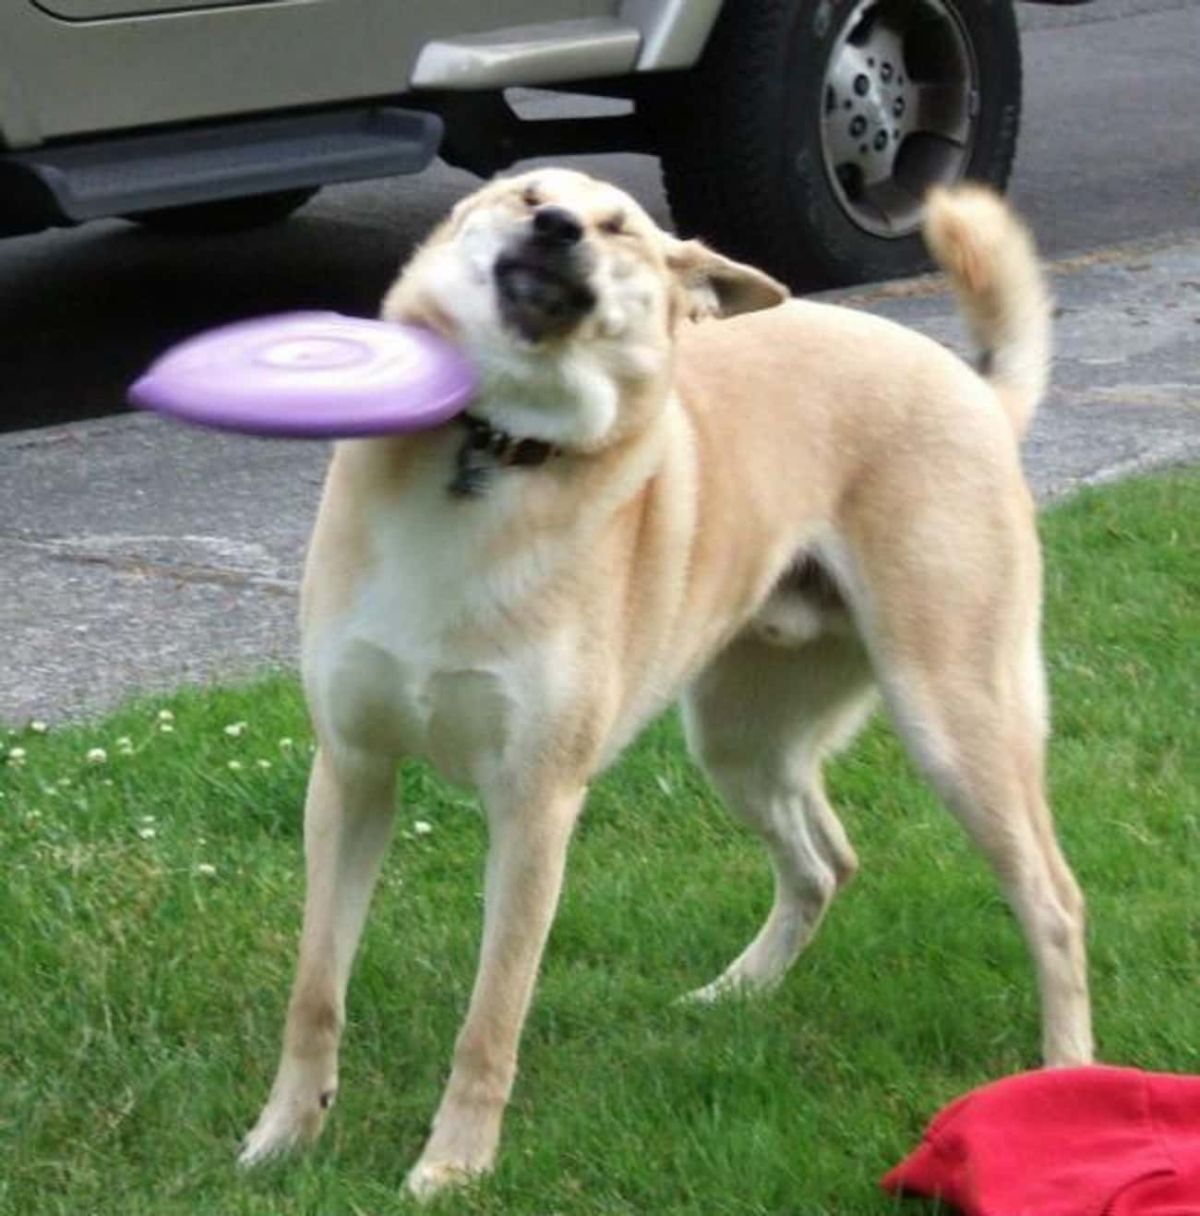 brown and white dog flinching with a purple frisbee hitting it in the neck